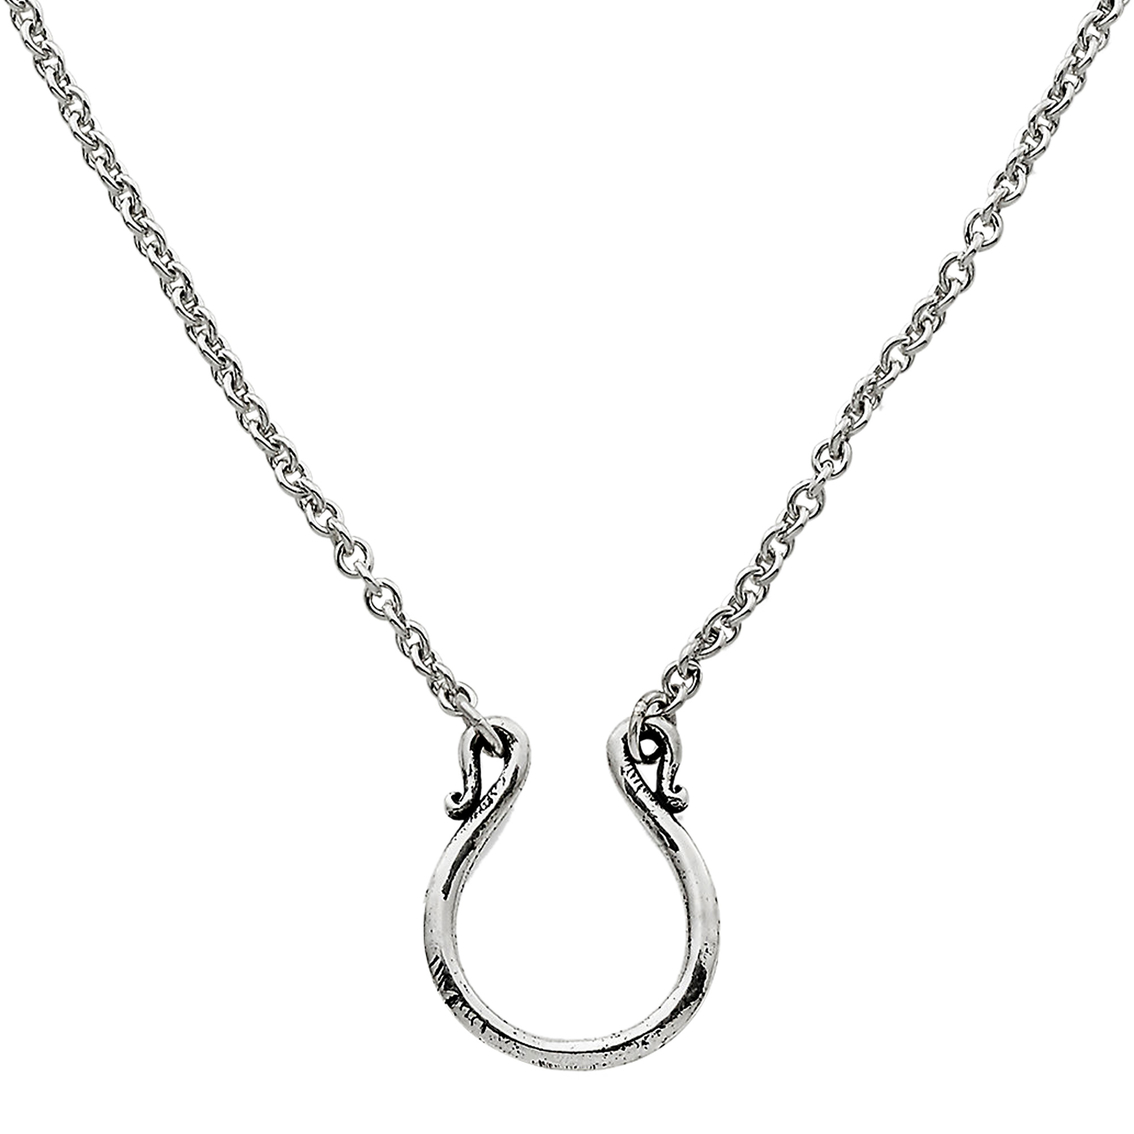 James Avery Changeable Charm Holder Necklace - Image 2 of 2